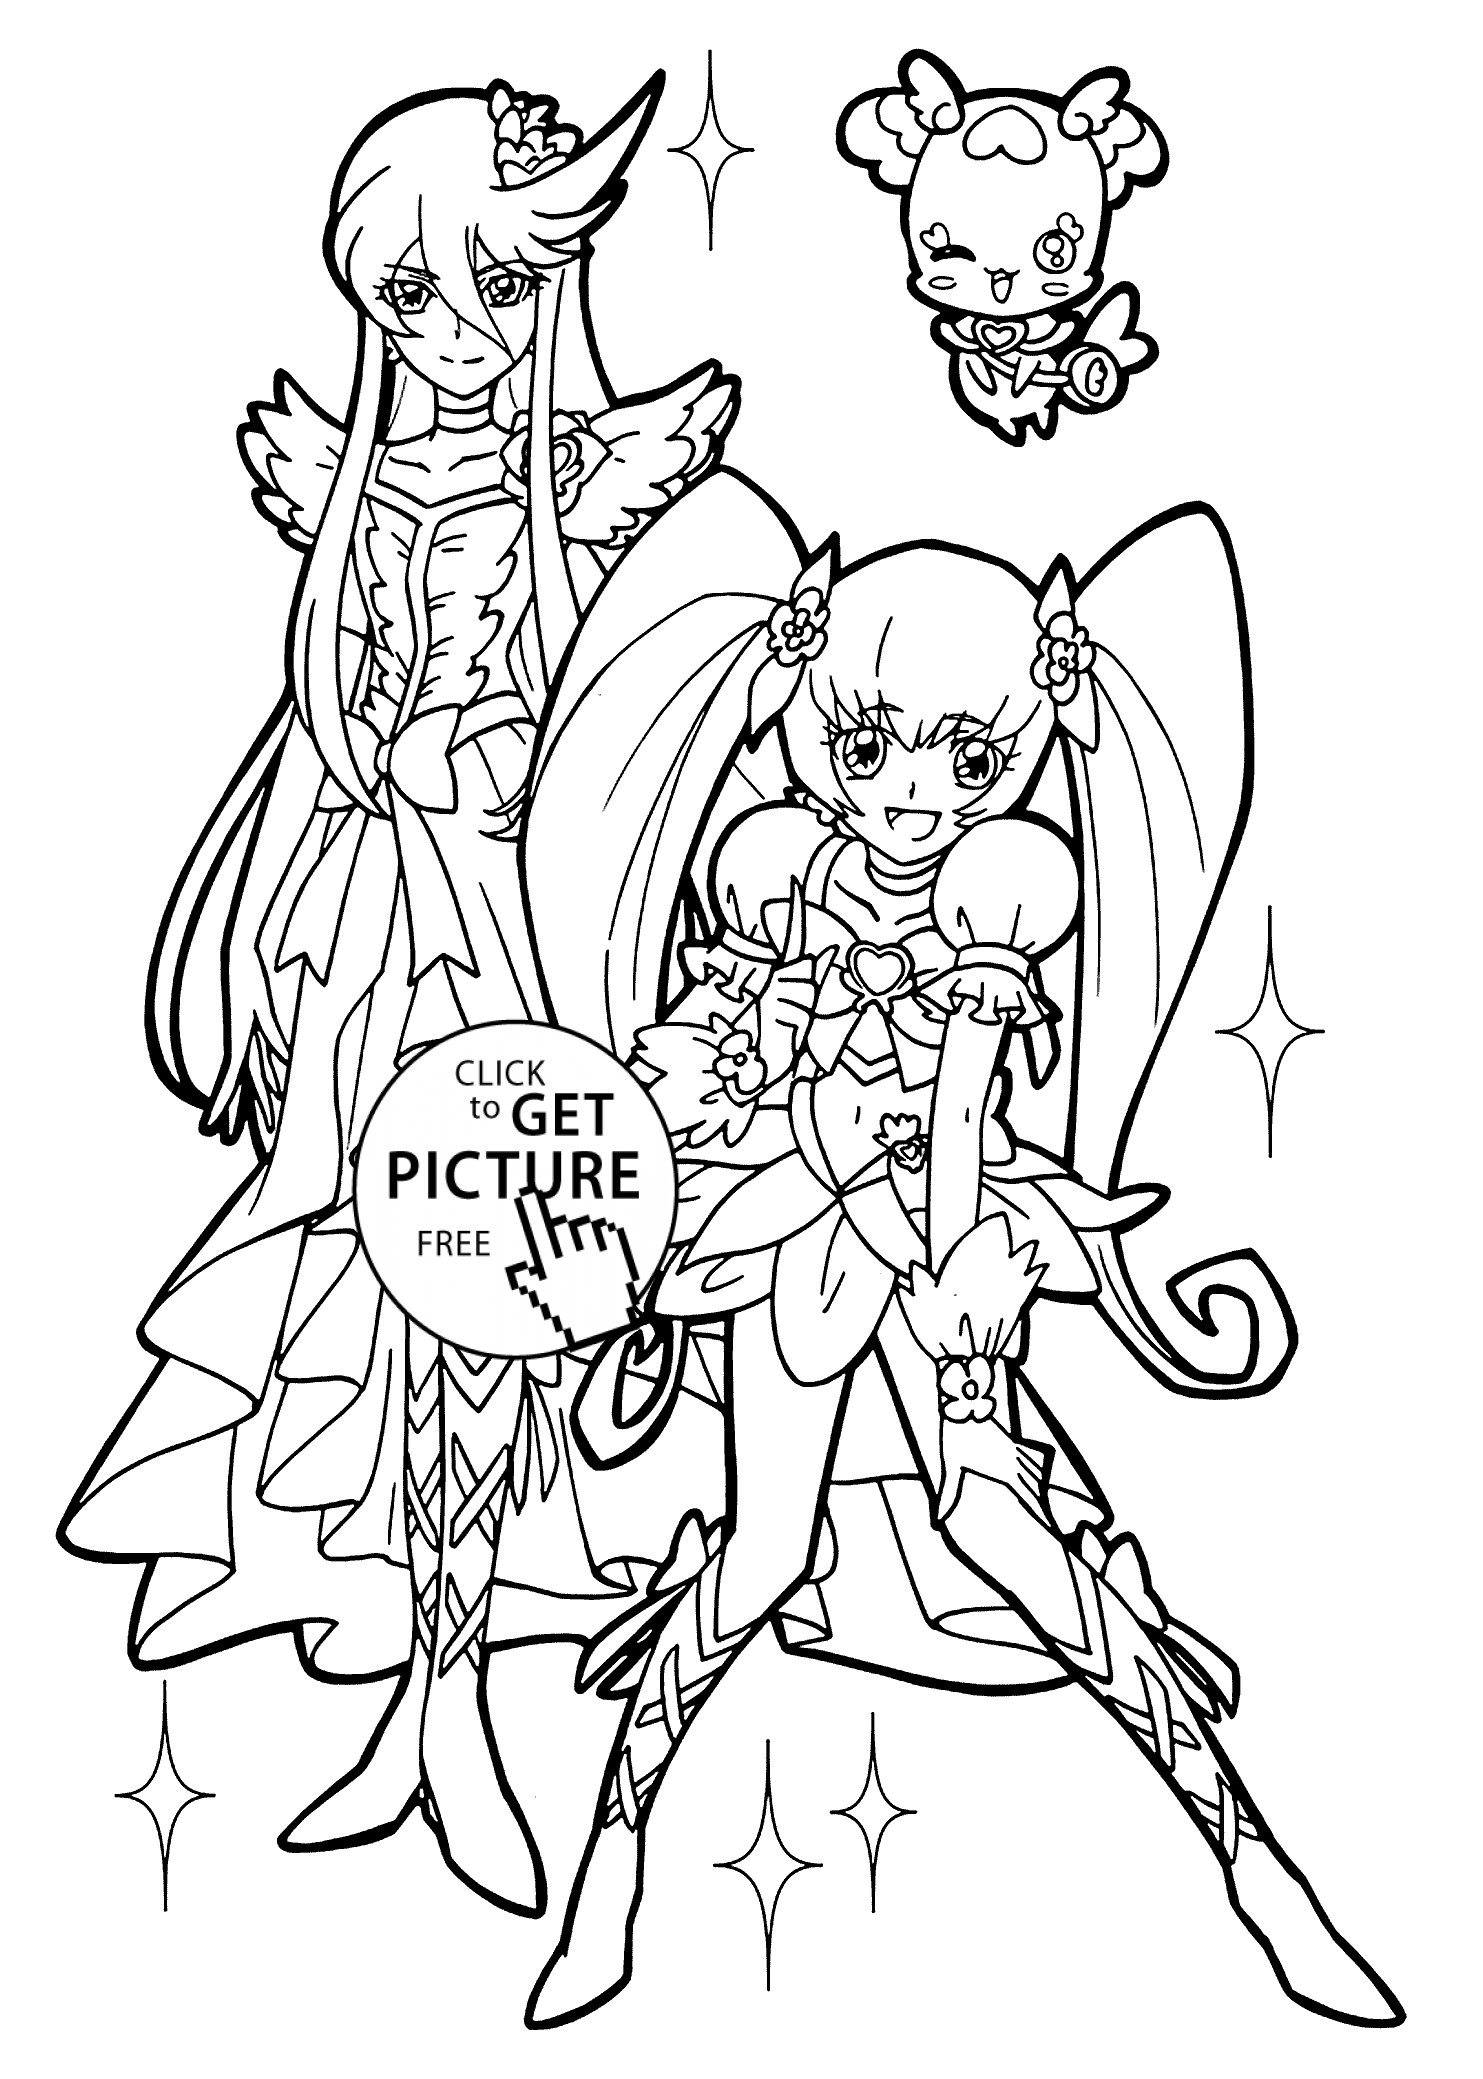 Coloring Pages Of Pretty Girls
 Nice girl from Pretty cure coloring pages for kids